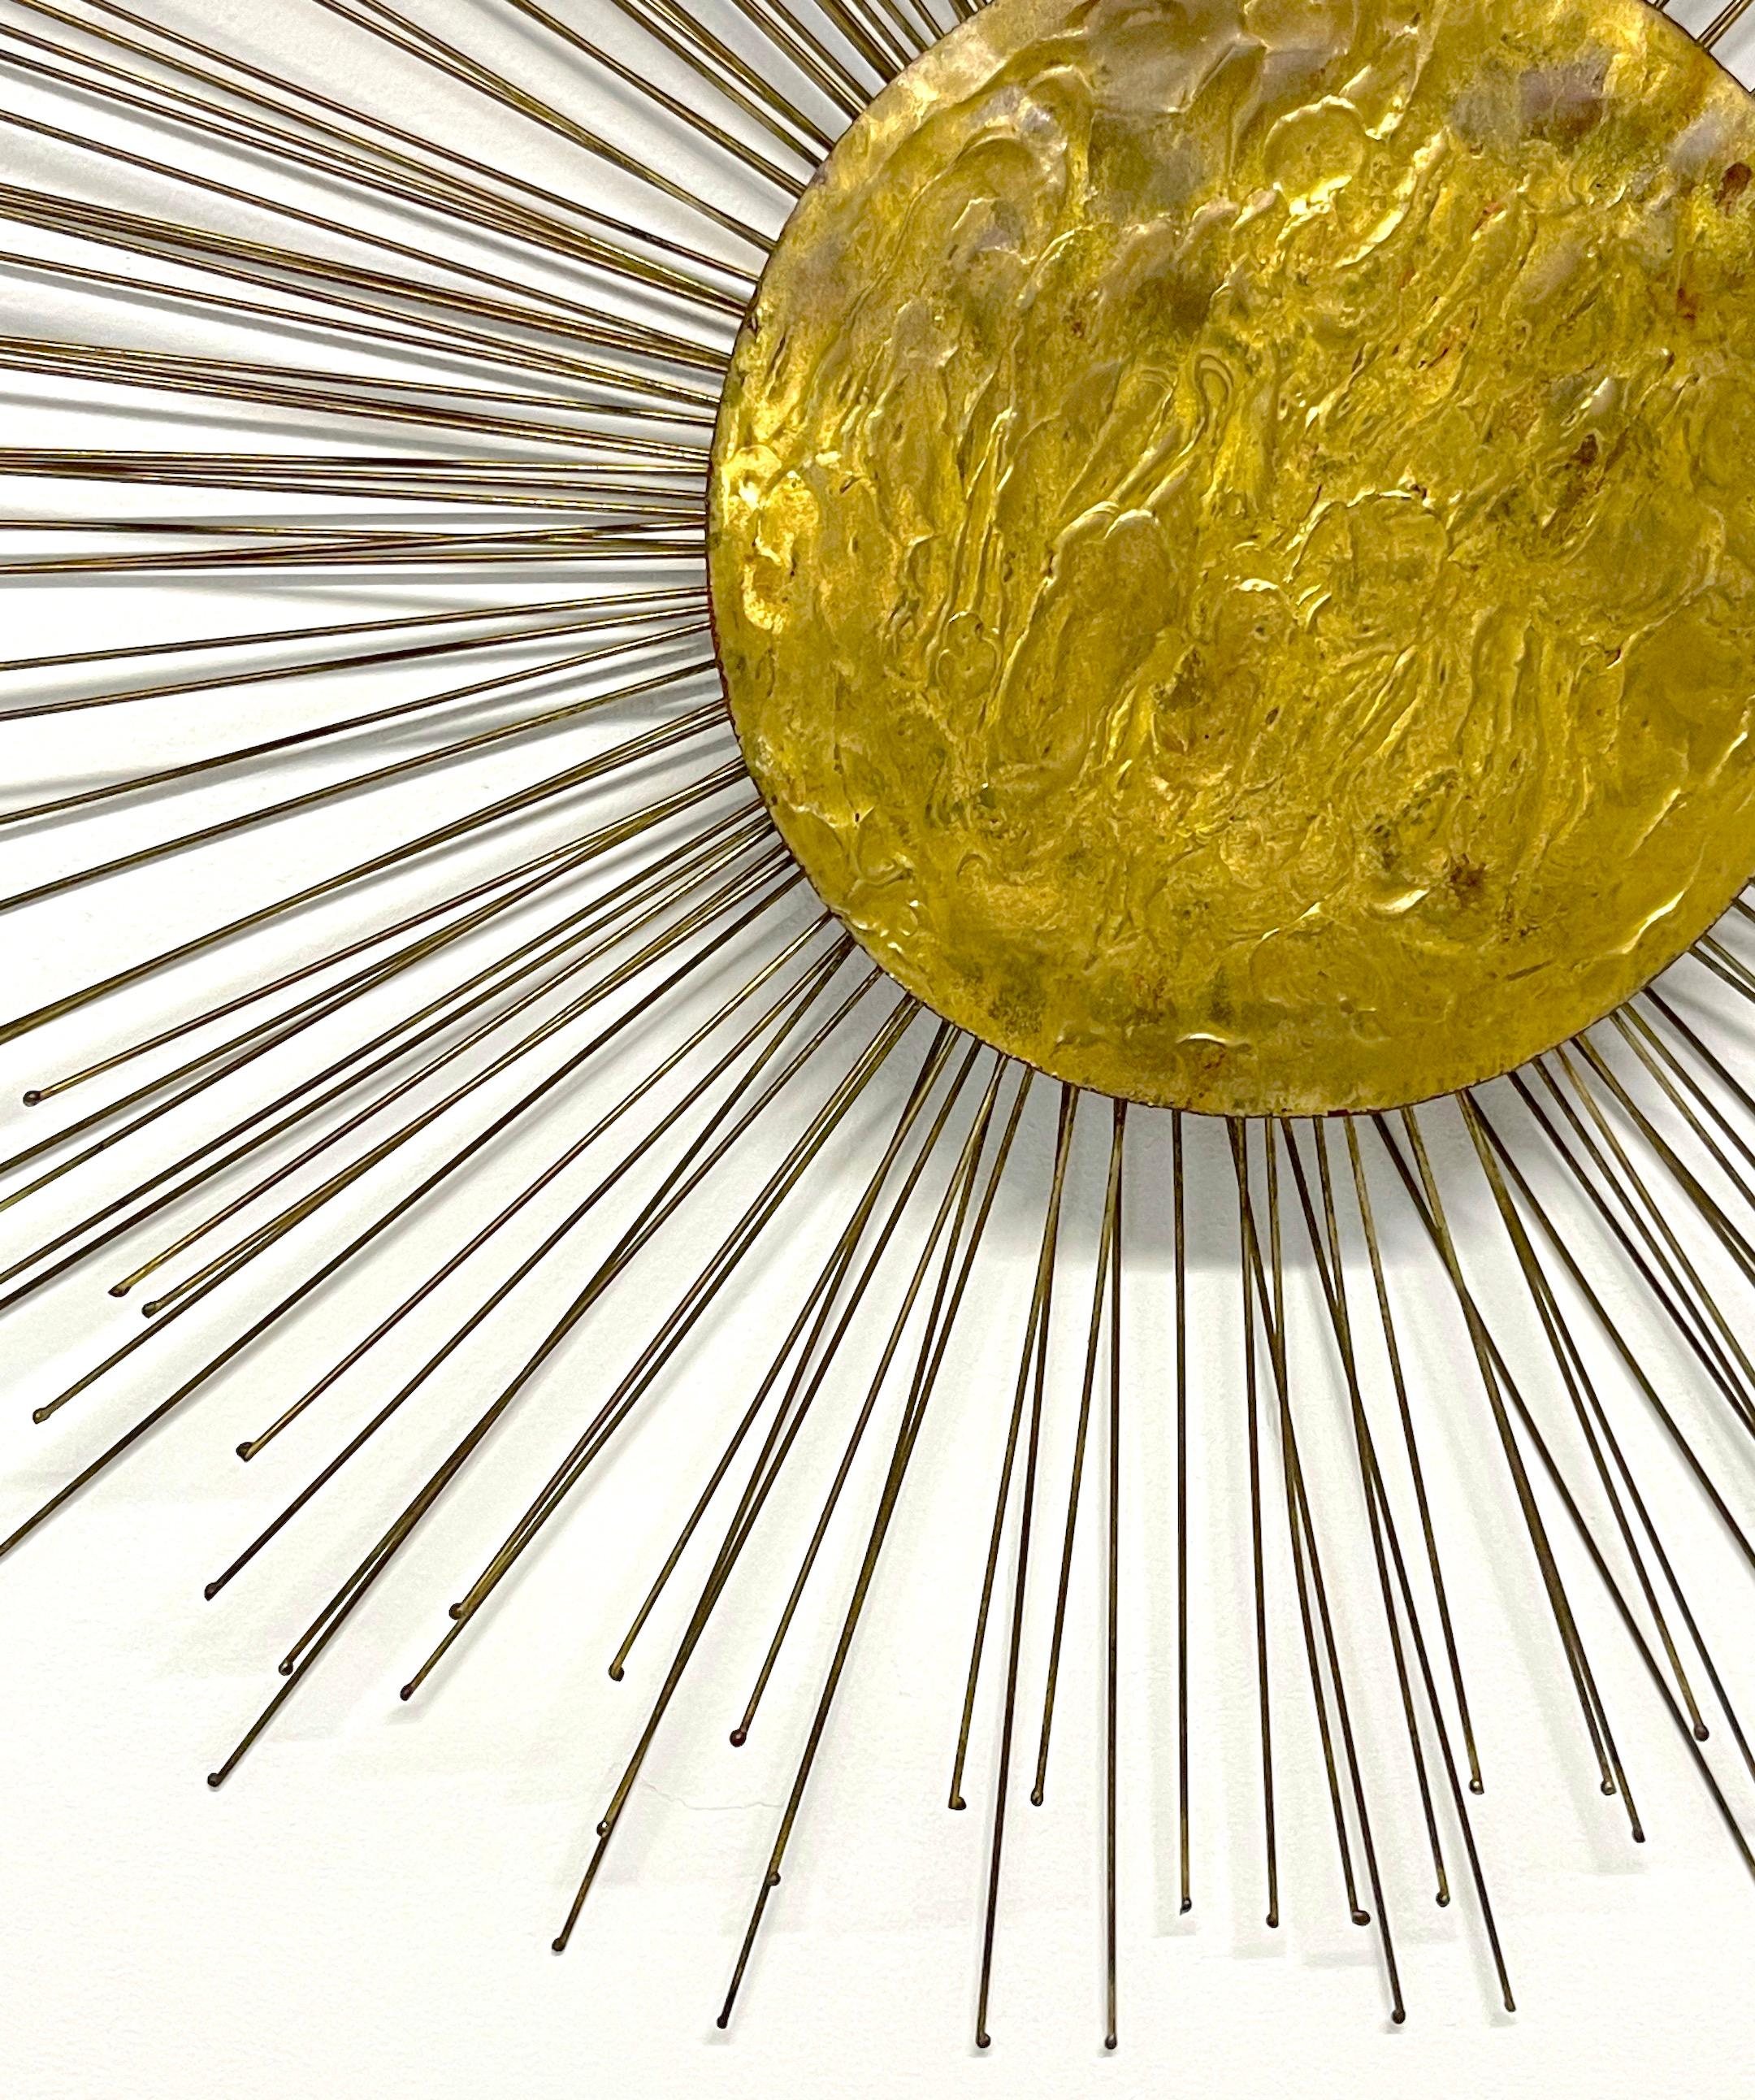  Midcentury Gilt Bronze Sunburst Wall Sculpture, Attributed to William Friedle  In Good Condition For Sale In West Palm Beach, FL